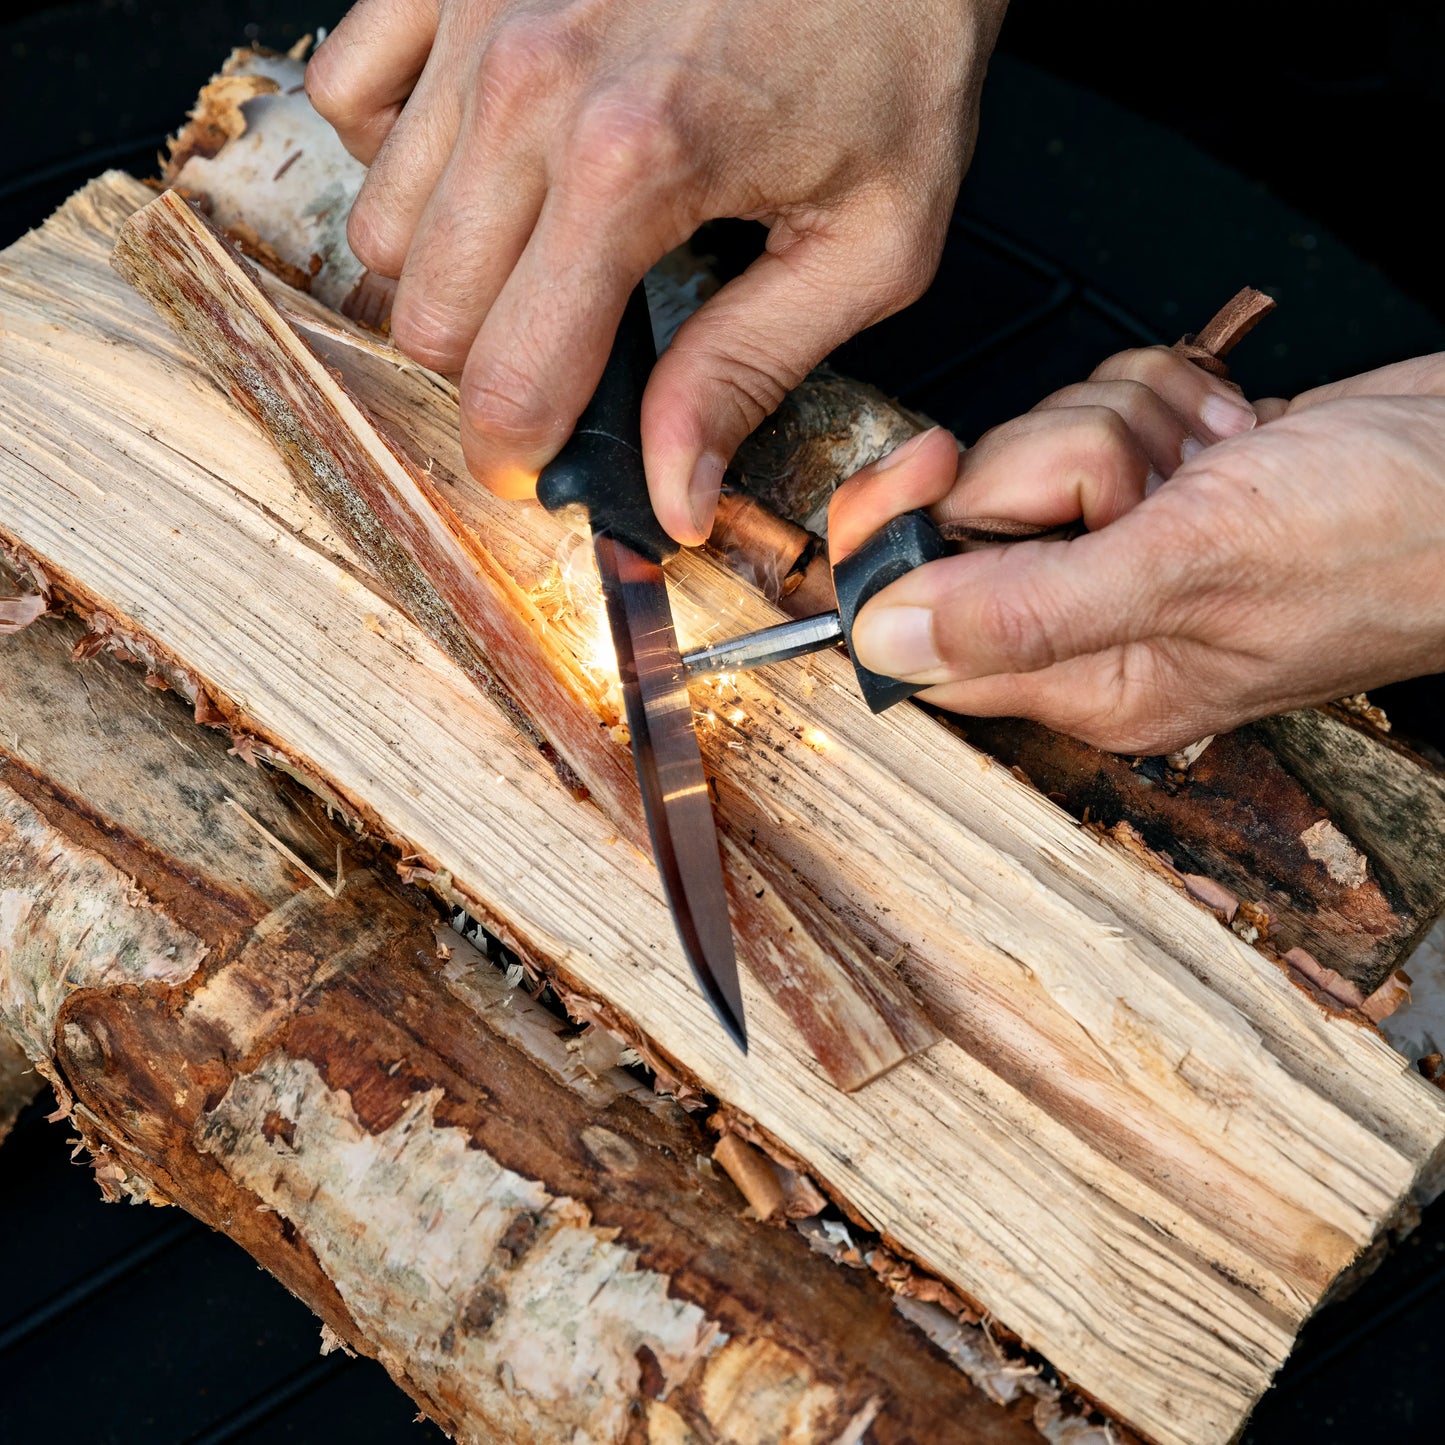 Making sparks with knife and ferro rod on wood log.